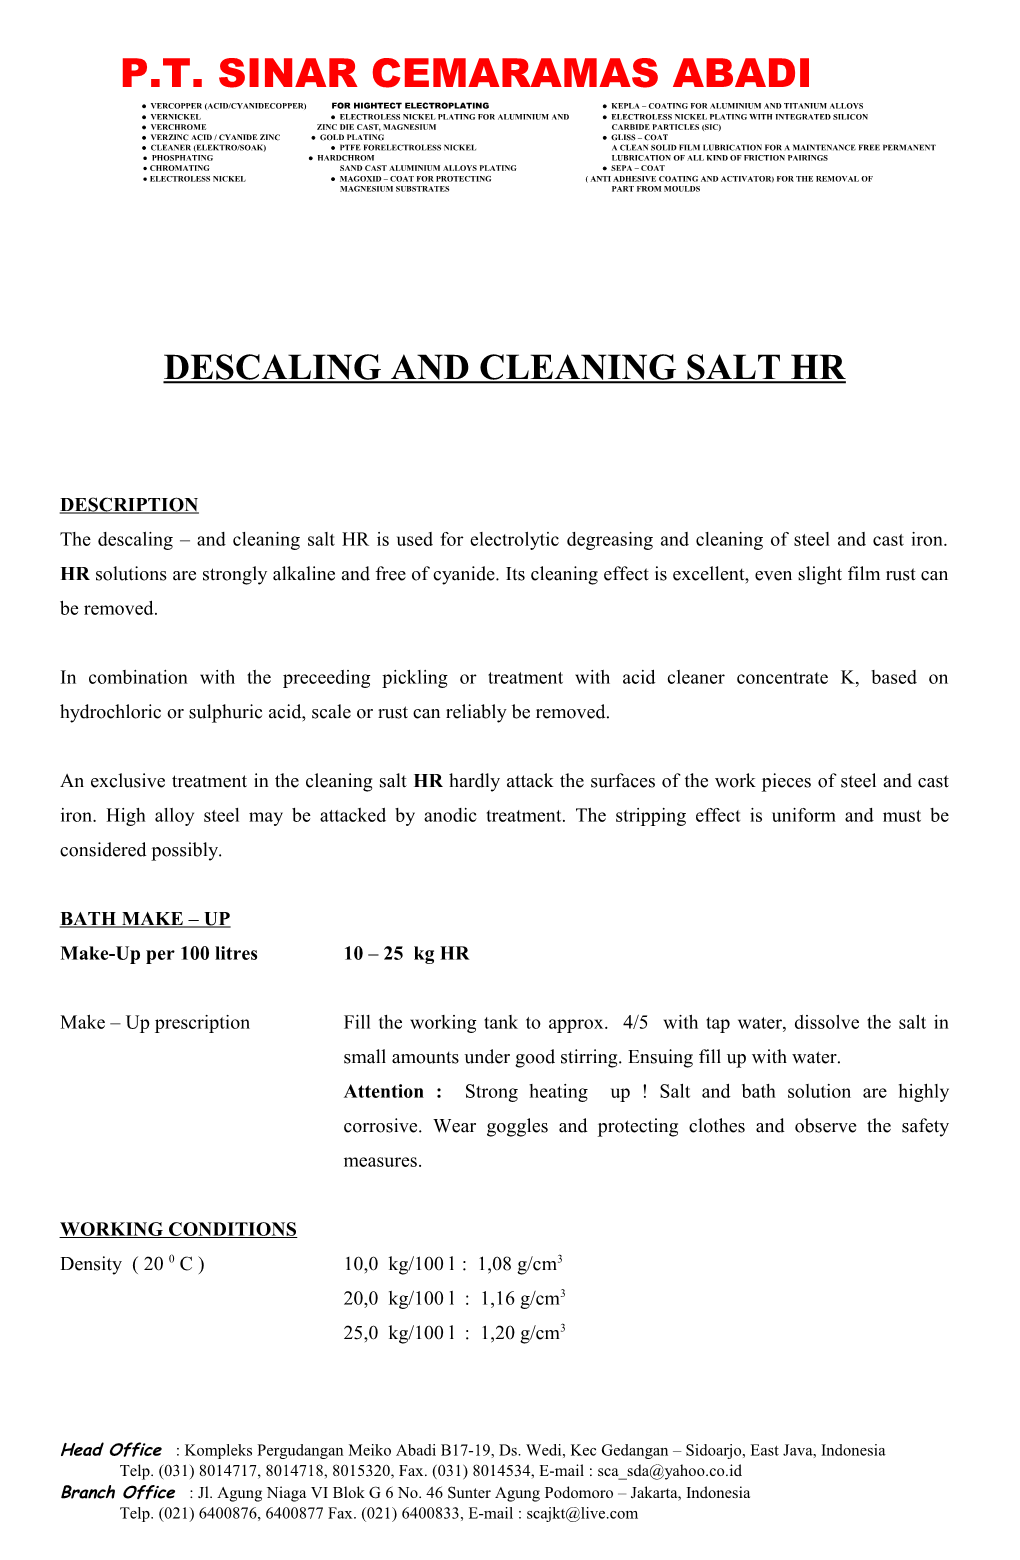 Descaling and Cleaning Salt Hr